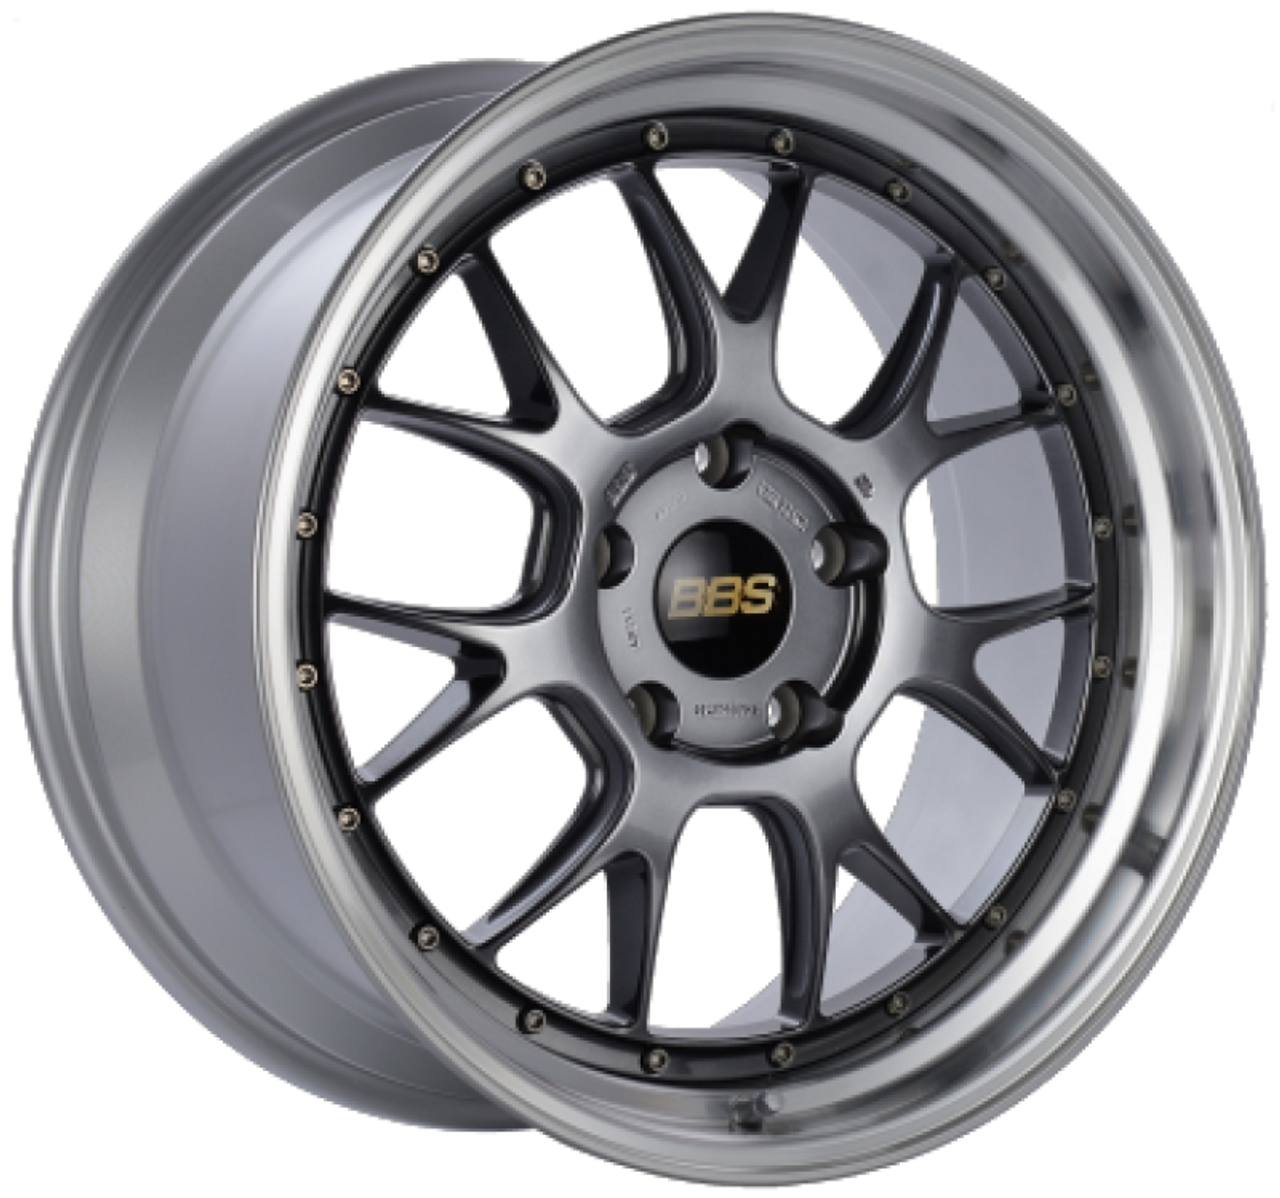 AR Signature 19 BBS LM-R Wheel Set for BMW G20 3 Series Fitment